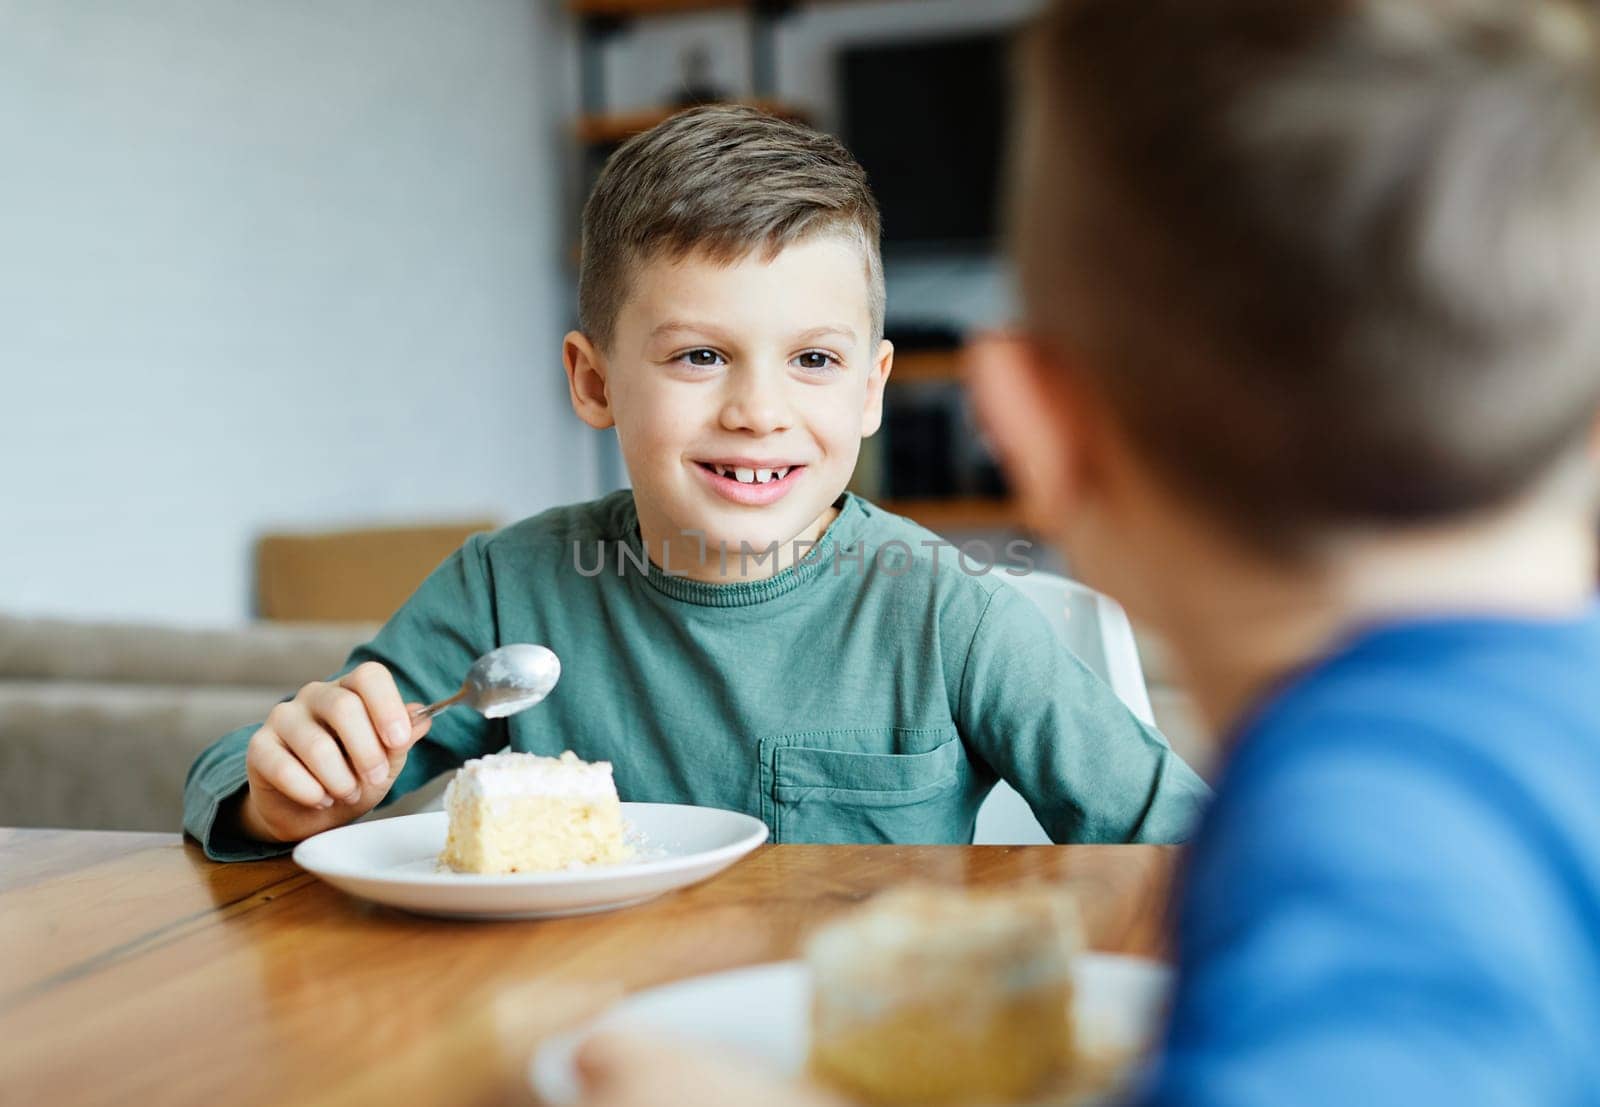 boy child brother friend cake food eating dessert family delicious sweet by Picsfive